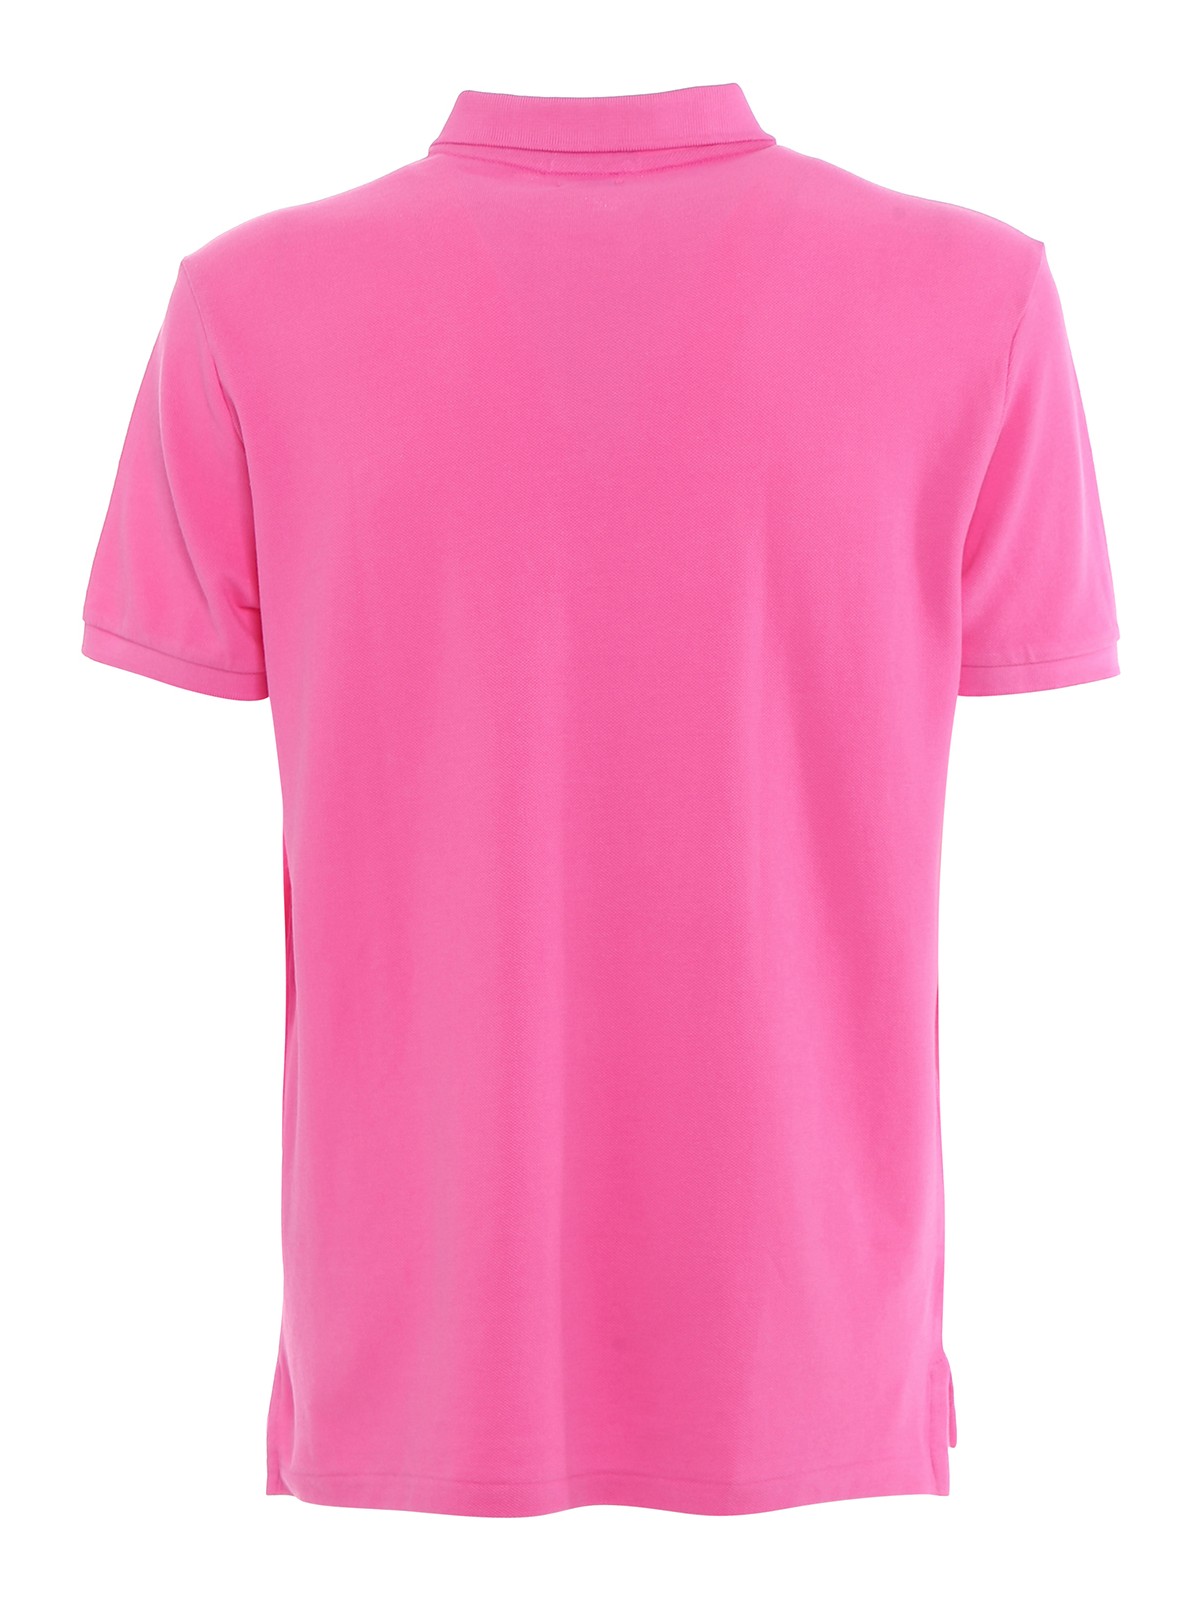 Shop Polo Ralph Lauren Polo - Custom Slim Fit In Pink